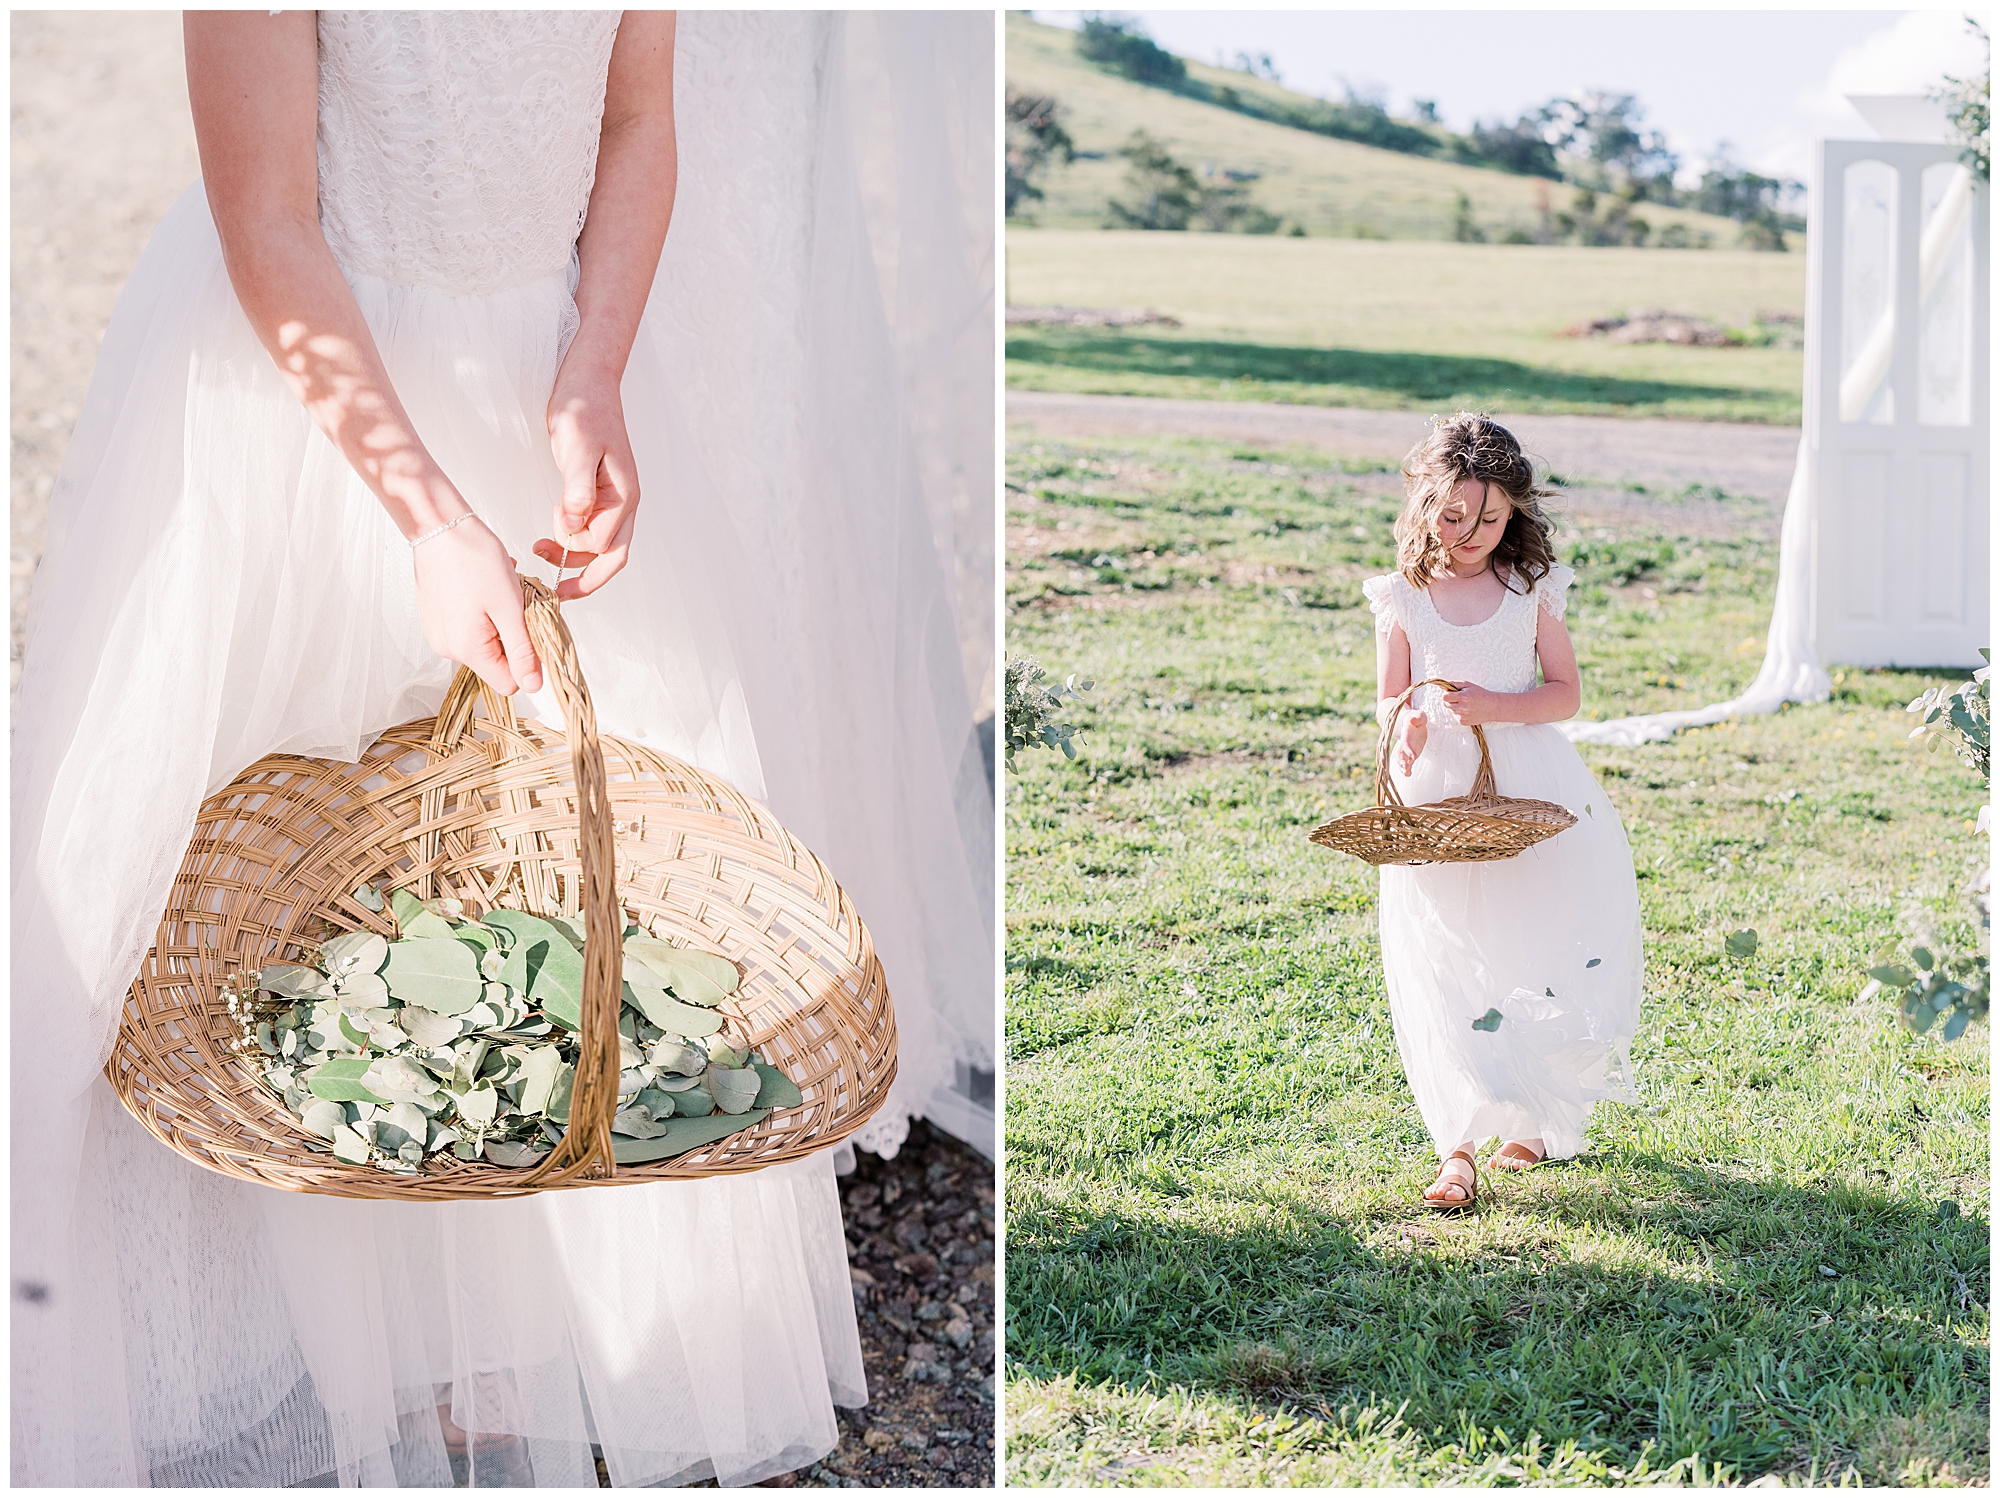 Flower girl with a white dress | Canberra wedding photpgrapher